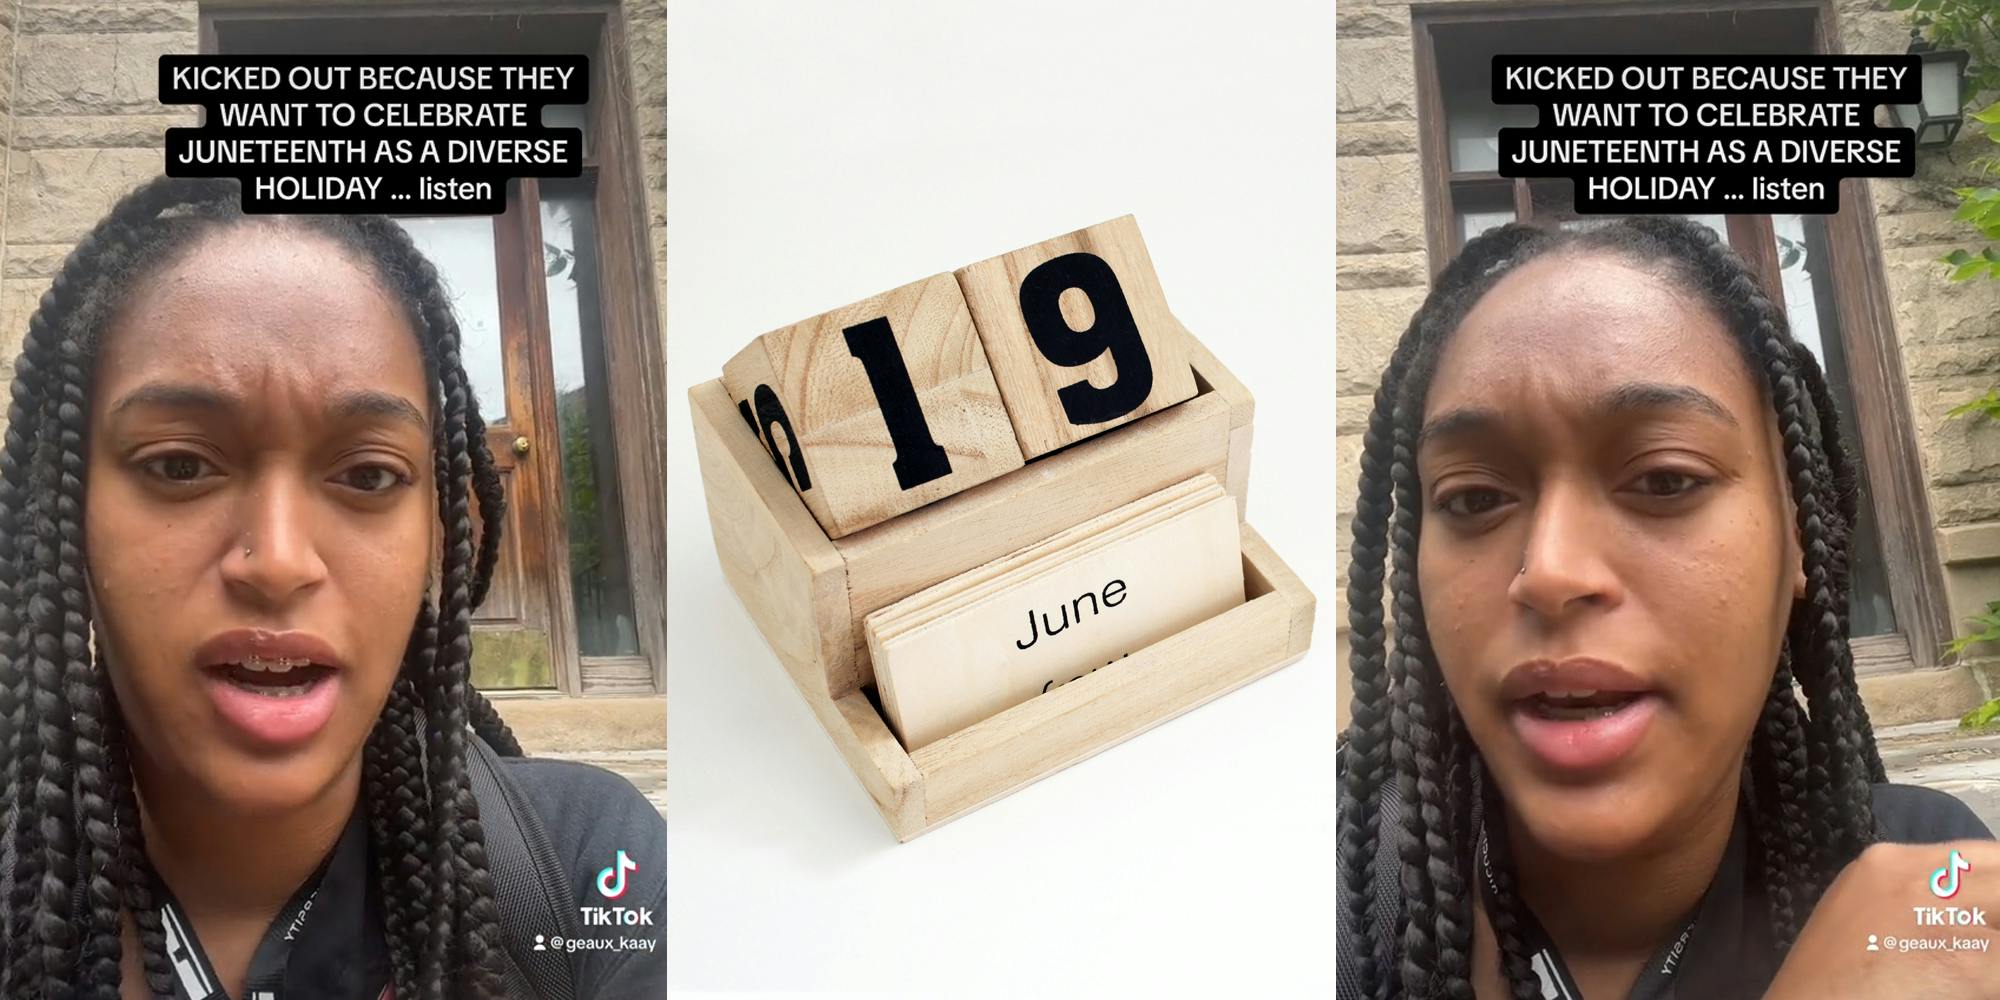 student speaking with caption "KICKED OUT BECAUSE THEY WANT TO CELEBRATE JUNETEENTH AS A DIVERSE HOLIDAY...listen" (l) June 19 on wooden blocks in calendar in front of white background (c) student speaking with caption "KICKED OUT BECAUSE THEY WANT TO CELEBRATE JUNETEENTH AS A DIVERSE HOLIDAY...listen" (r)